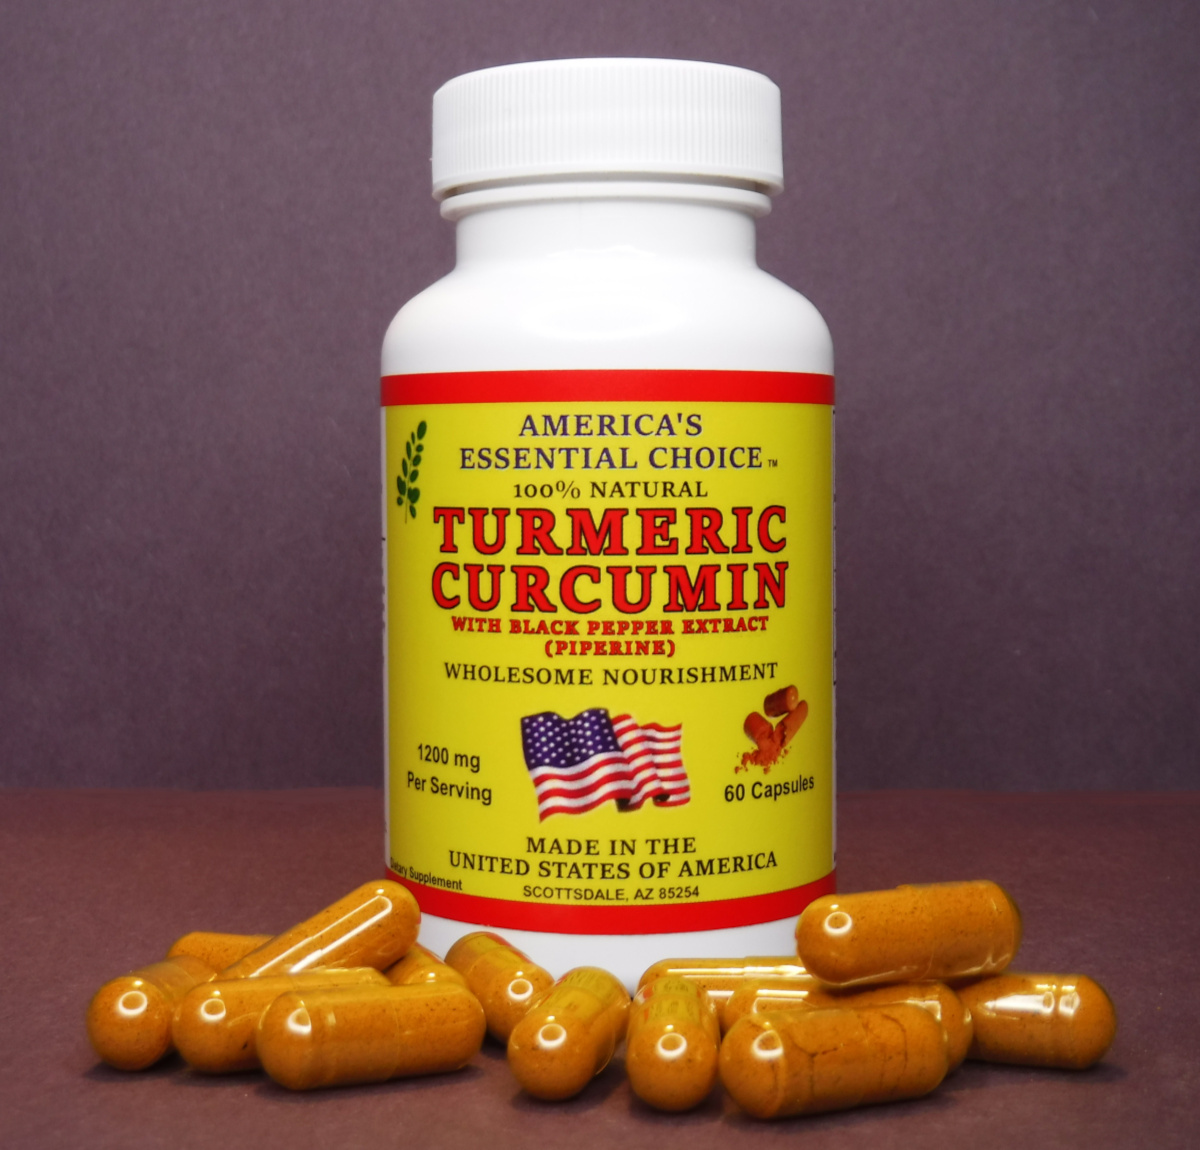 Turmeric & Curcumin Extract Supplement 1200mg Made In The USA